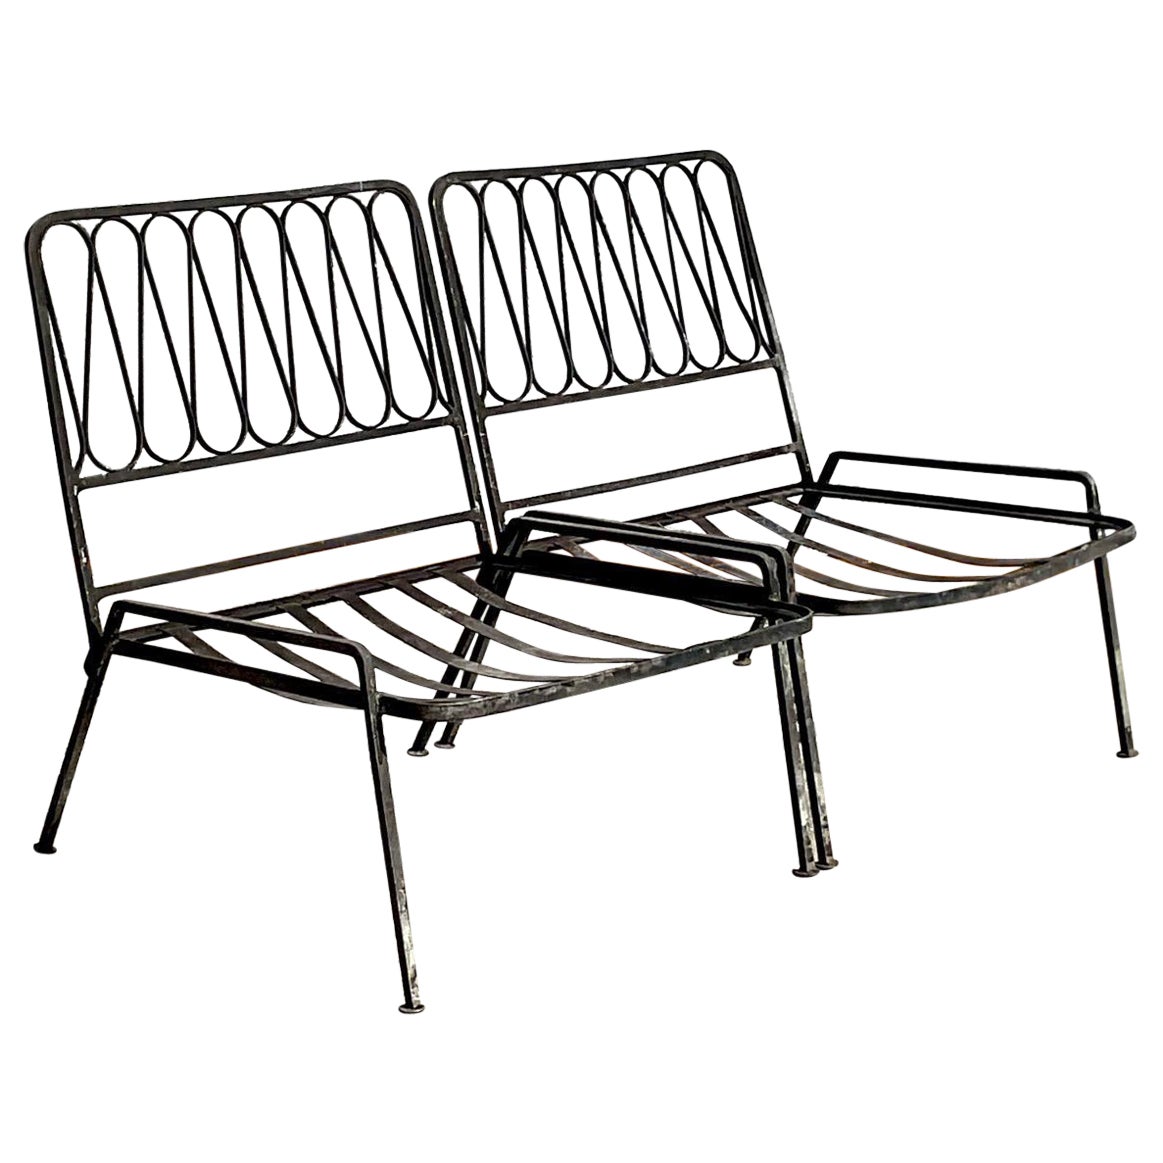 Vintage Mid-Century Modern Salterini Ribbon Wrought Iron Chairs - Set of 2 For Sale